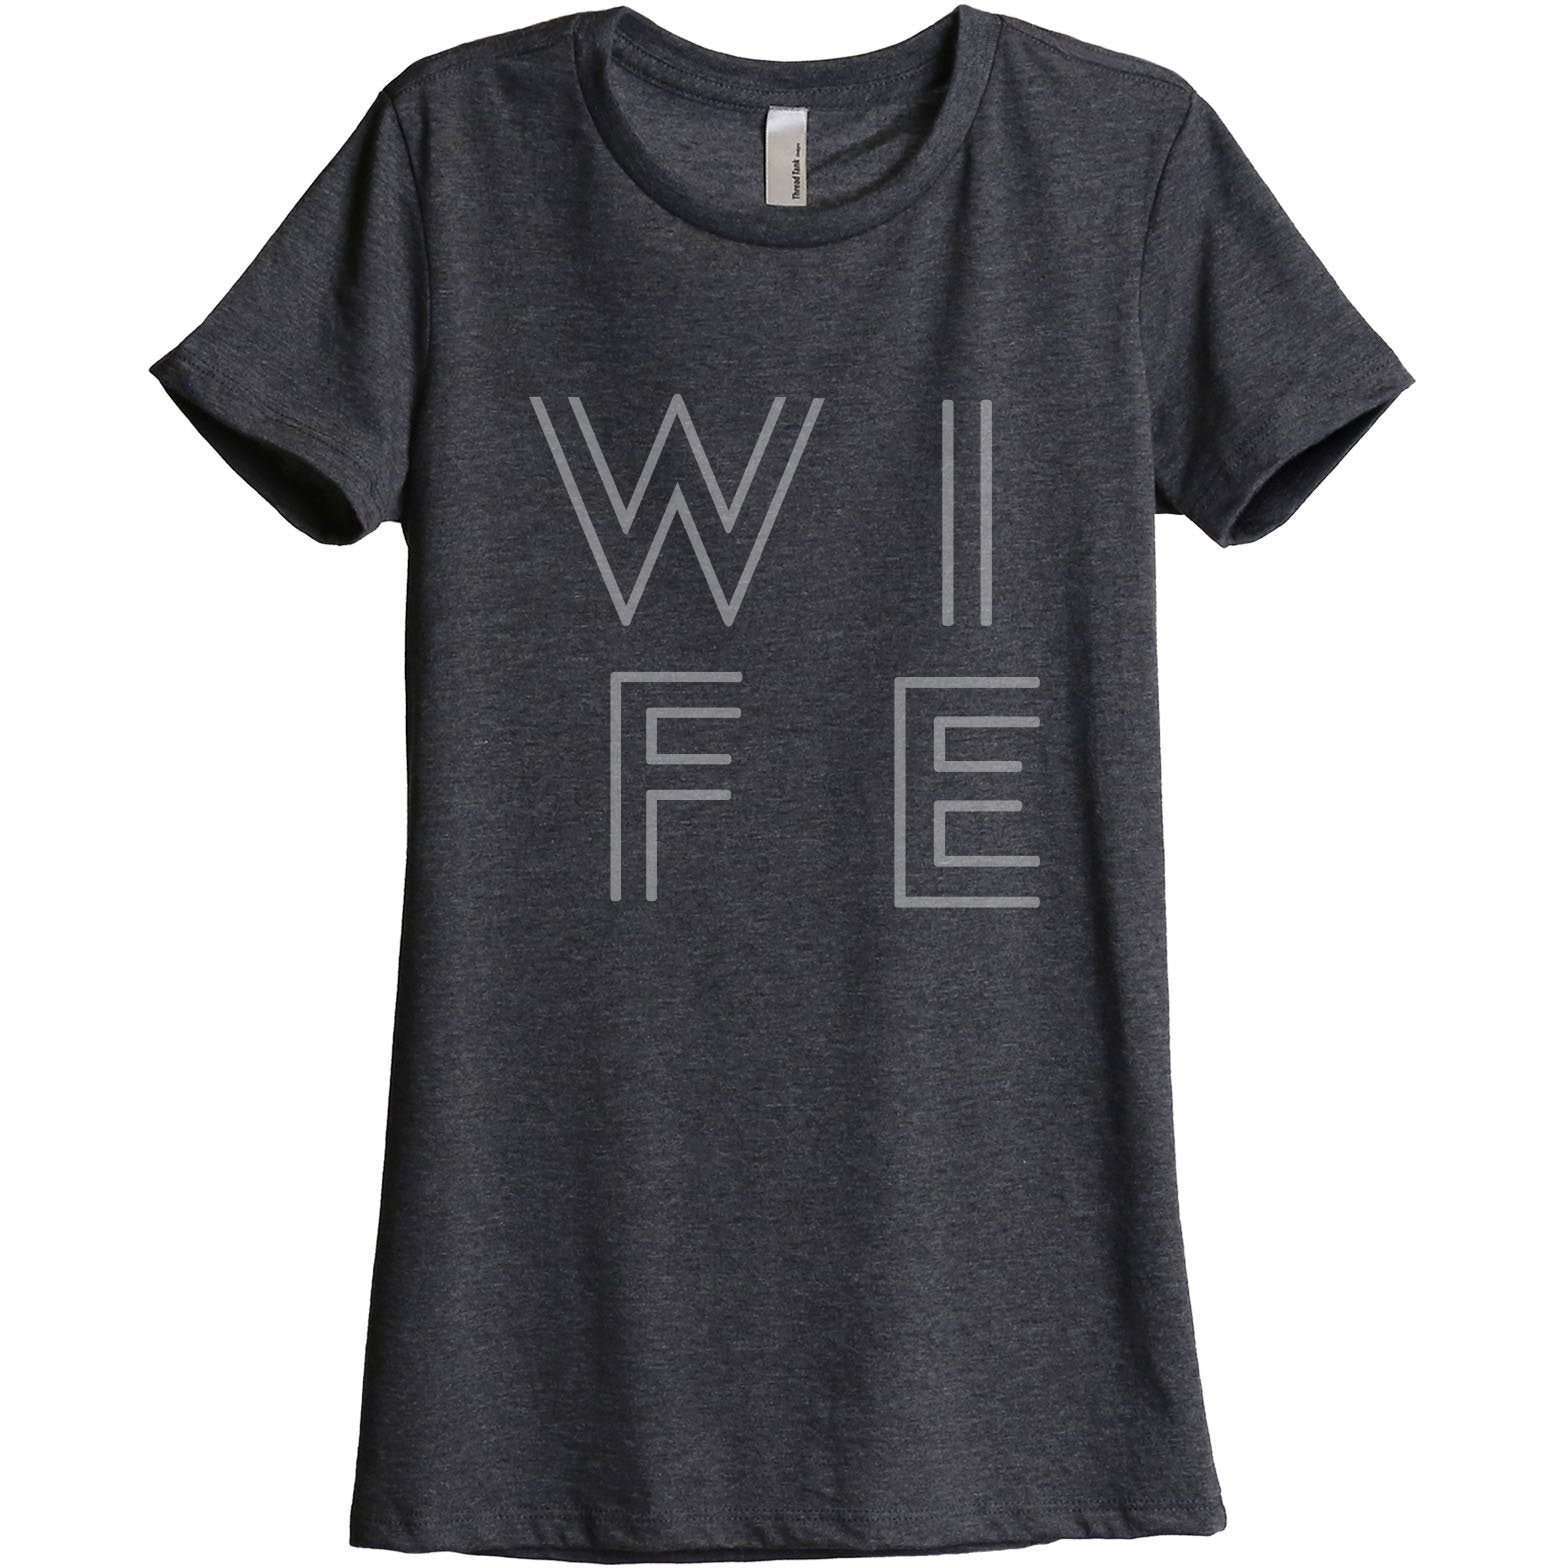 Wife Women's Relaxed Crewneck T-Shirt Top Tee Charcoal Grey
